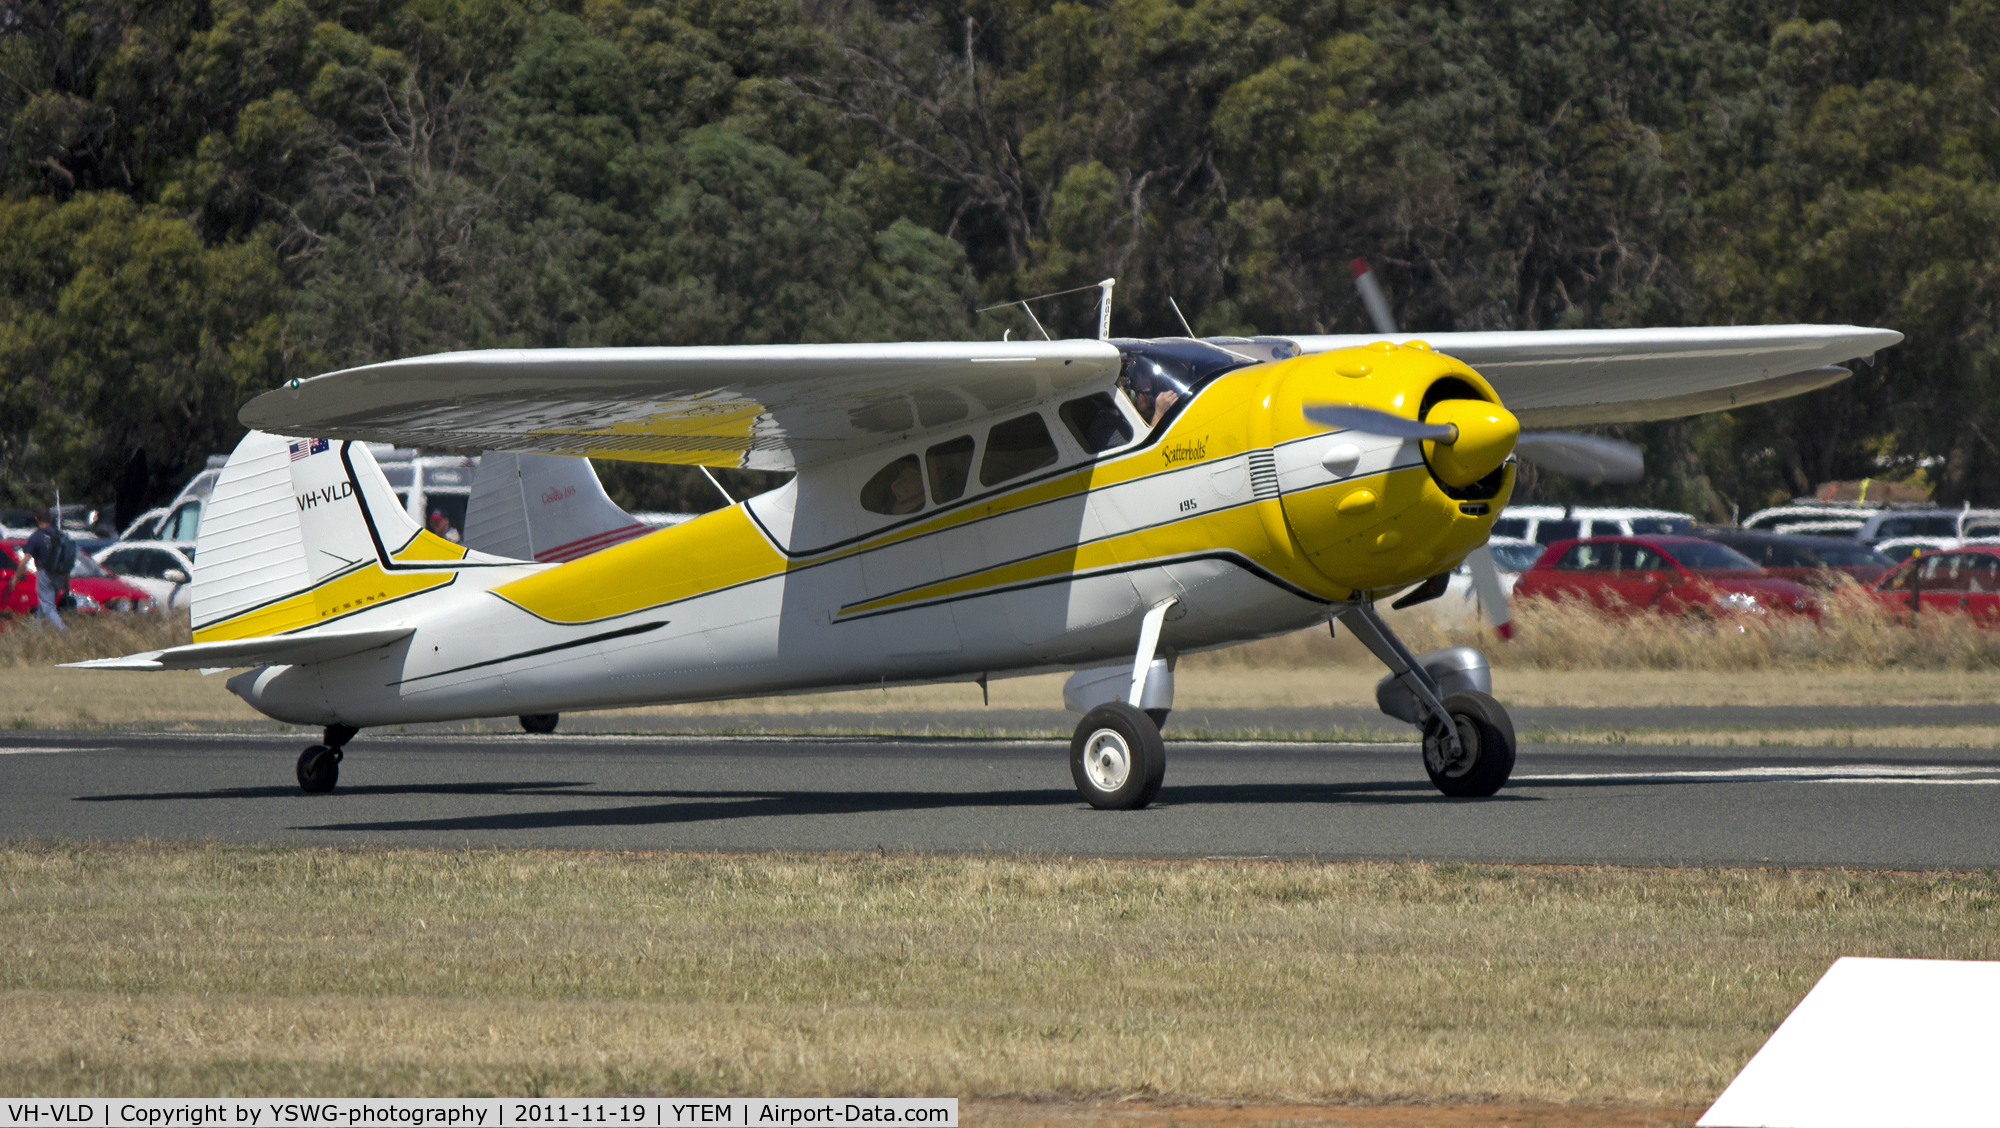 VH-VLD, 1953 Cessna 195B Businessliner C/N 16111, Cessna 195B getting ready for take off on Runway 36 during the Warbirds Downunder Airshow at Temora.